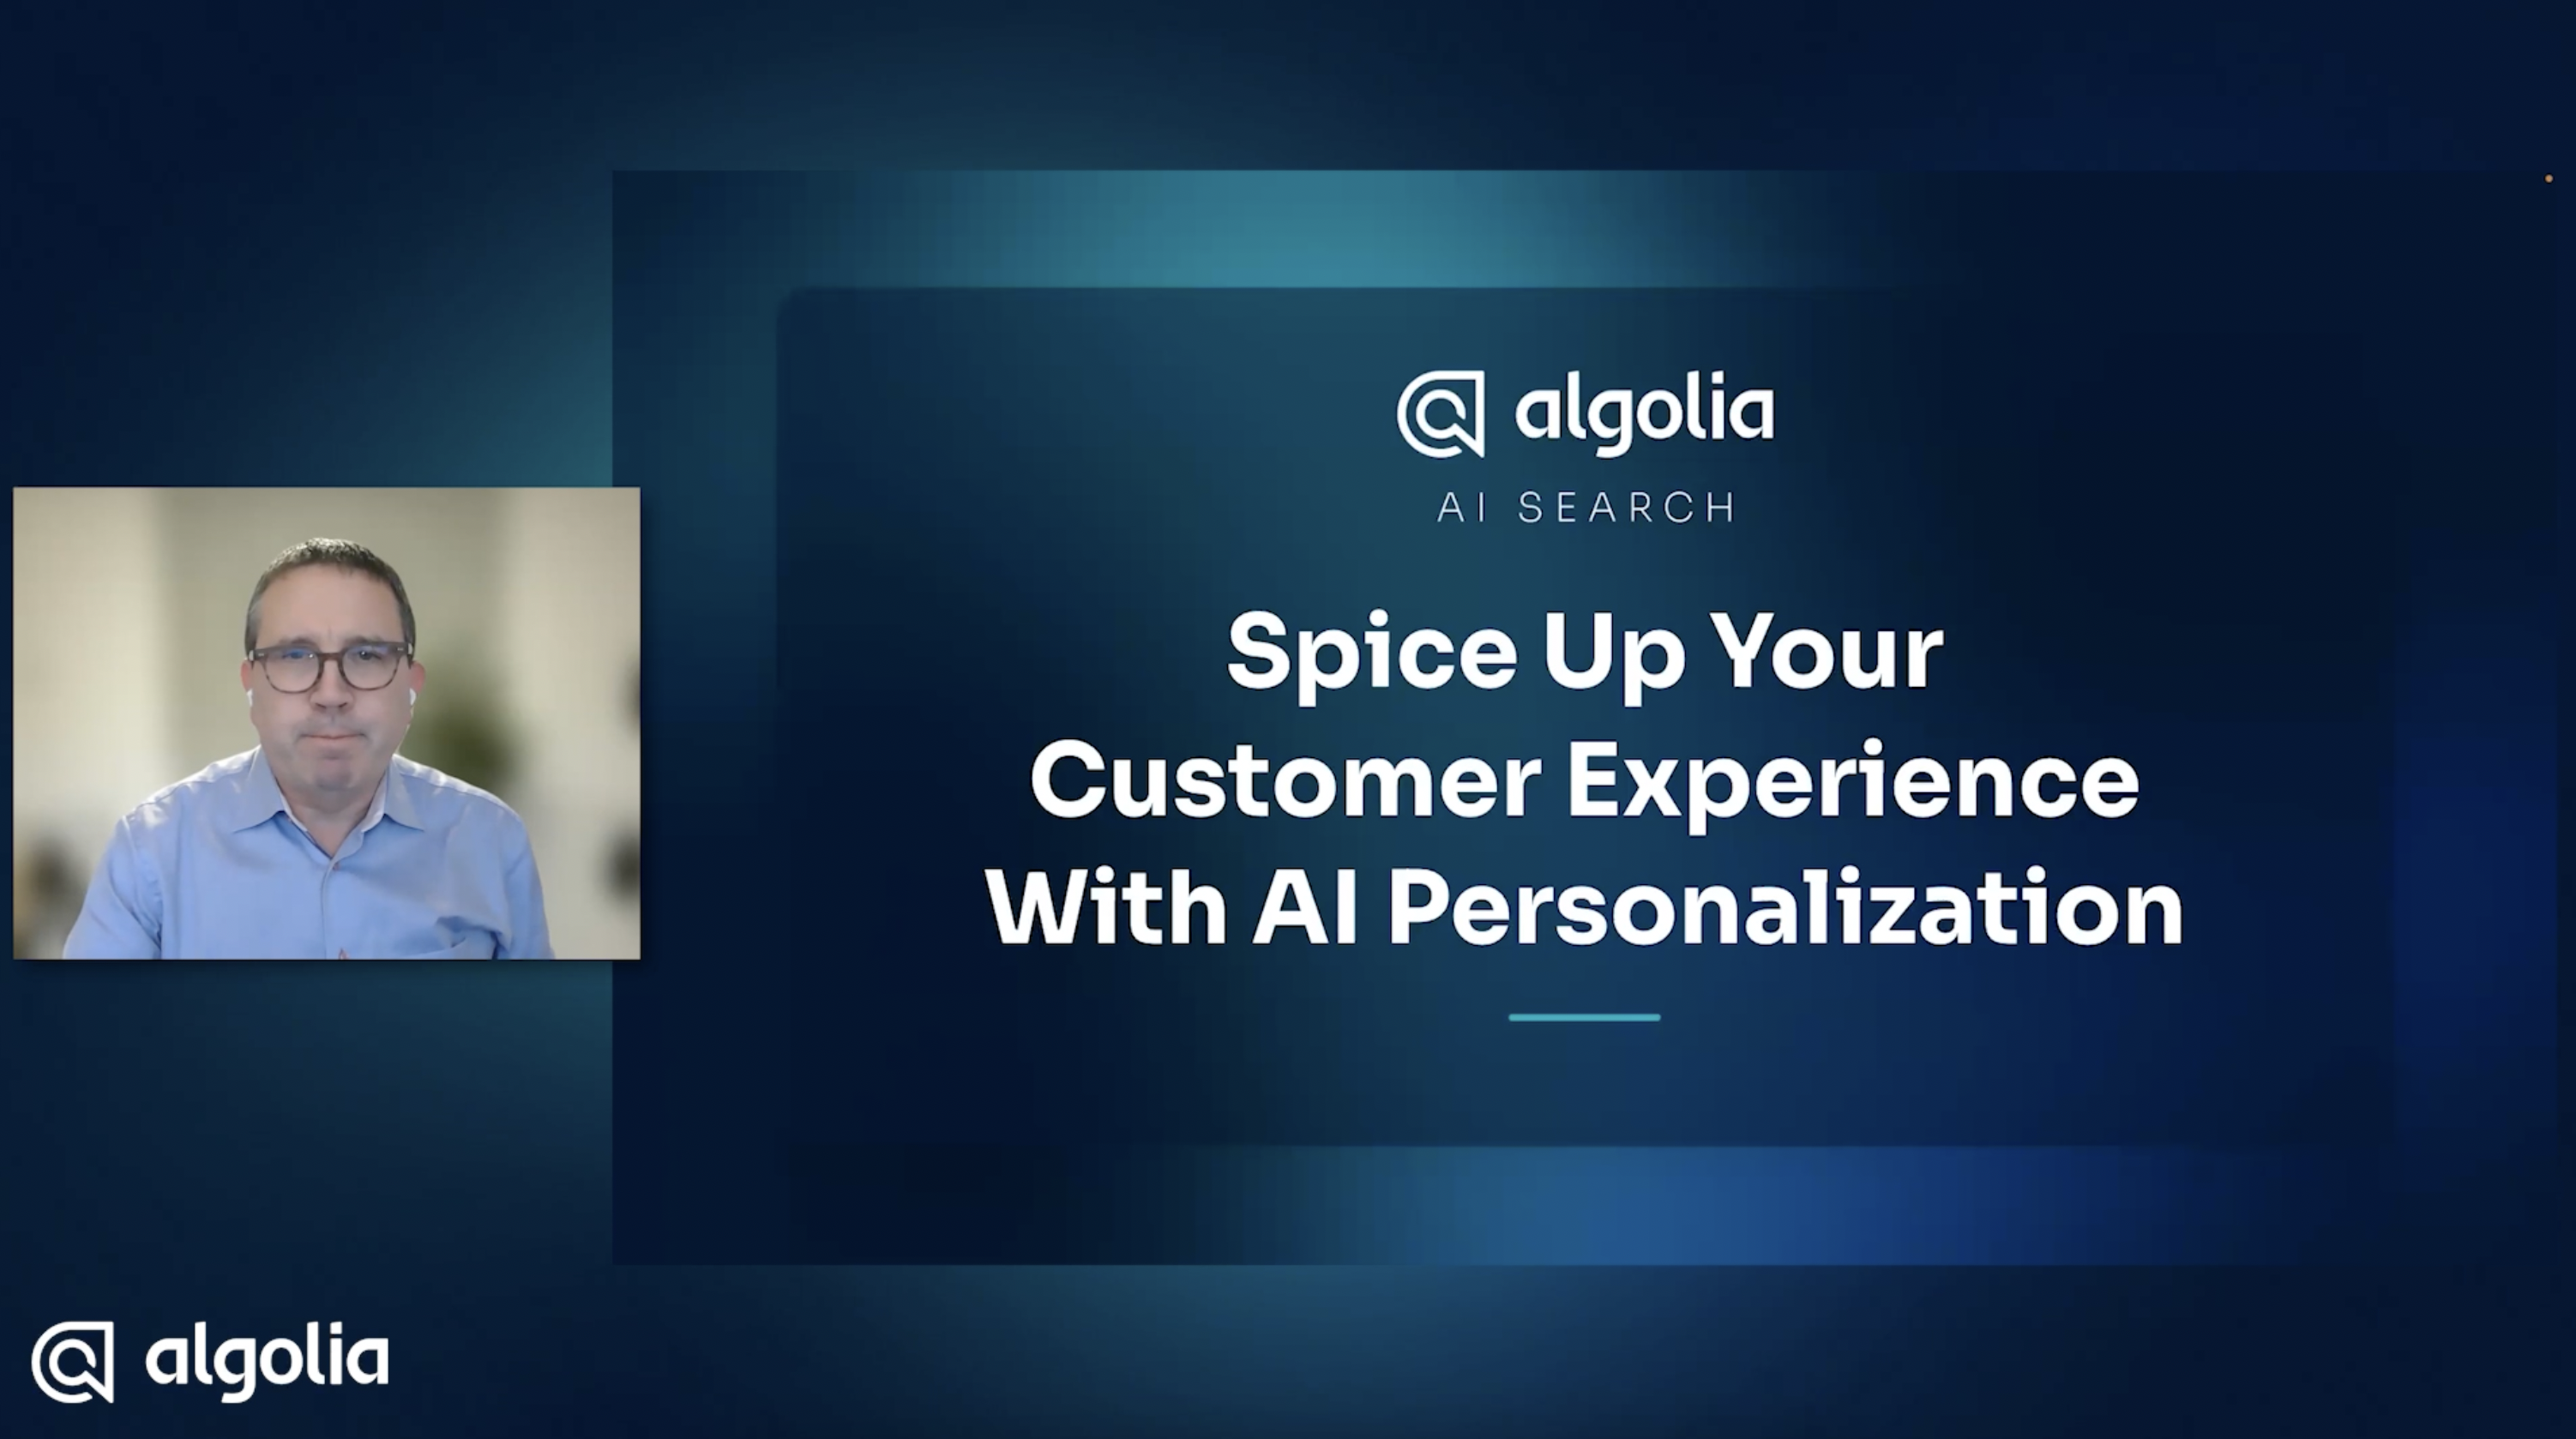 Spice up your customer experience with Algolia's personalization